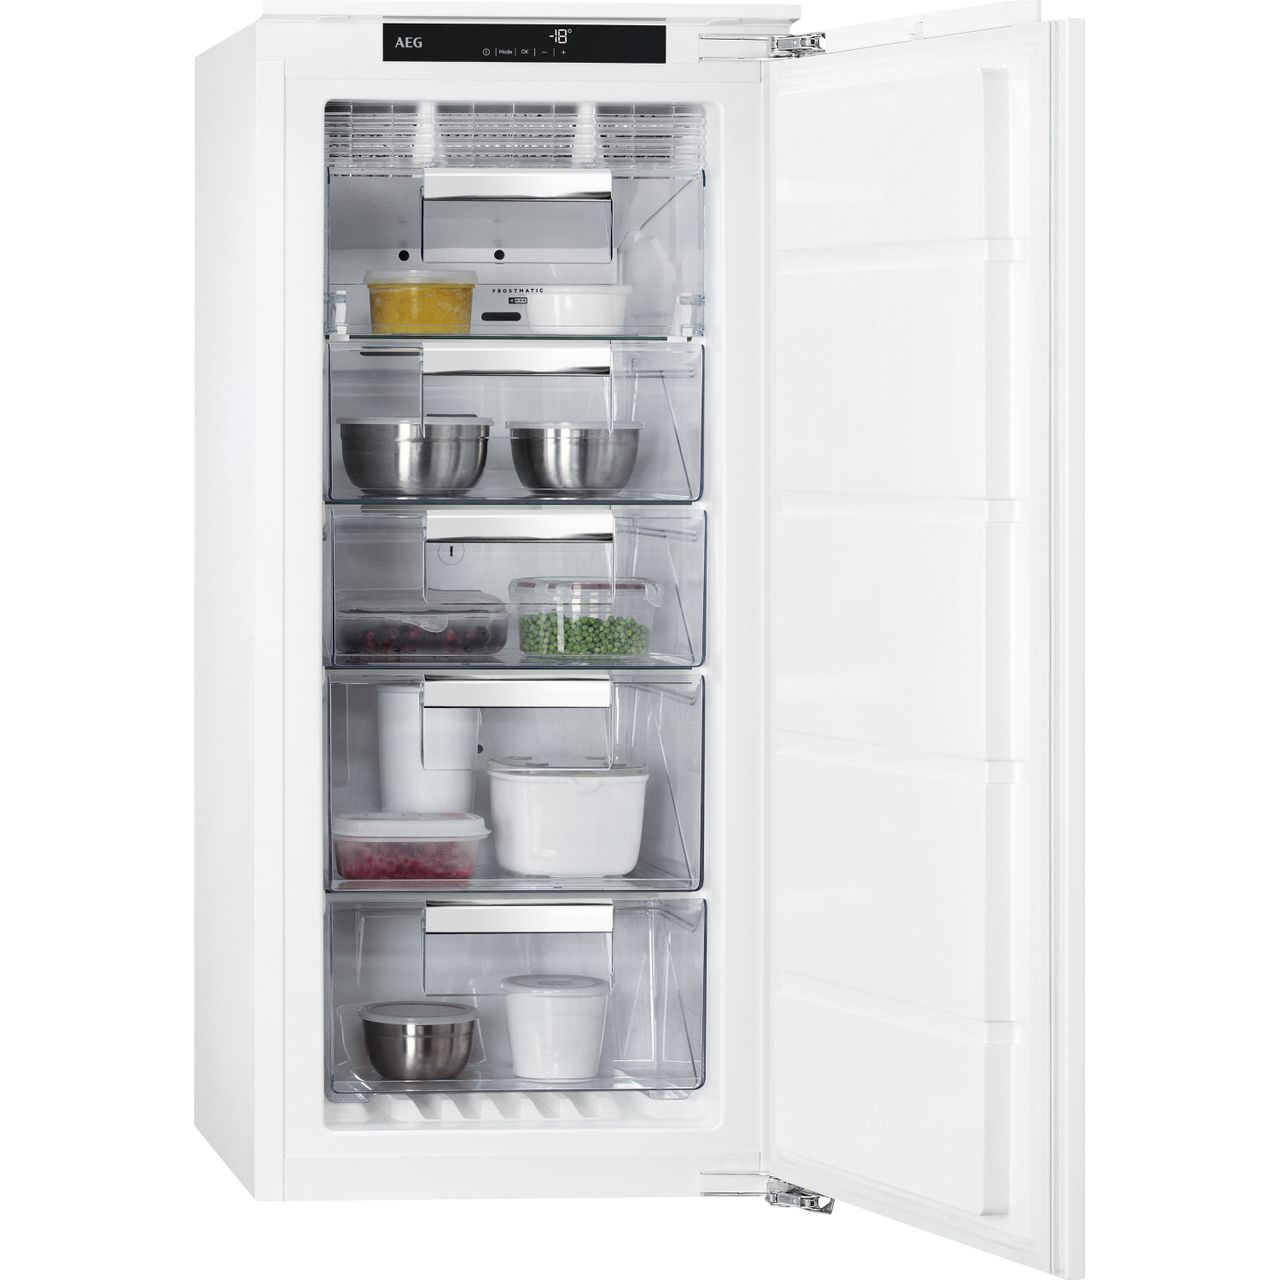 AEG ABB812E6NC Integrated Frost Free Upright Freezer with Fixed Door Fixing Kit Review